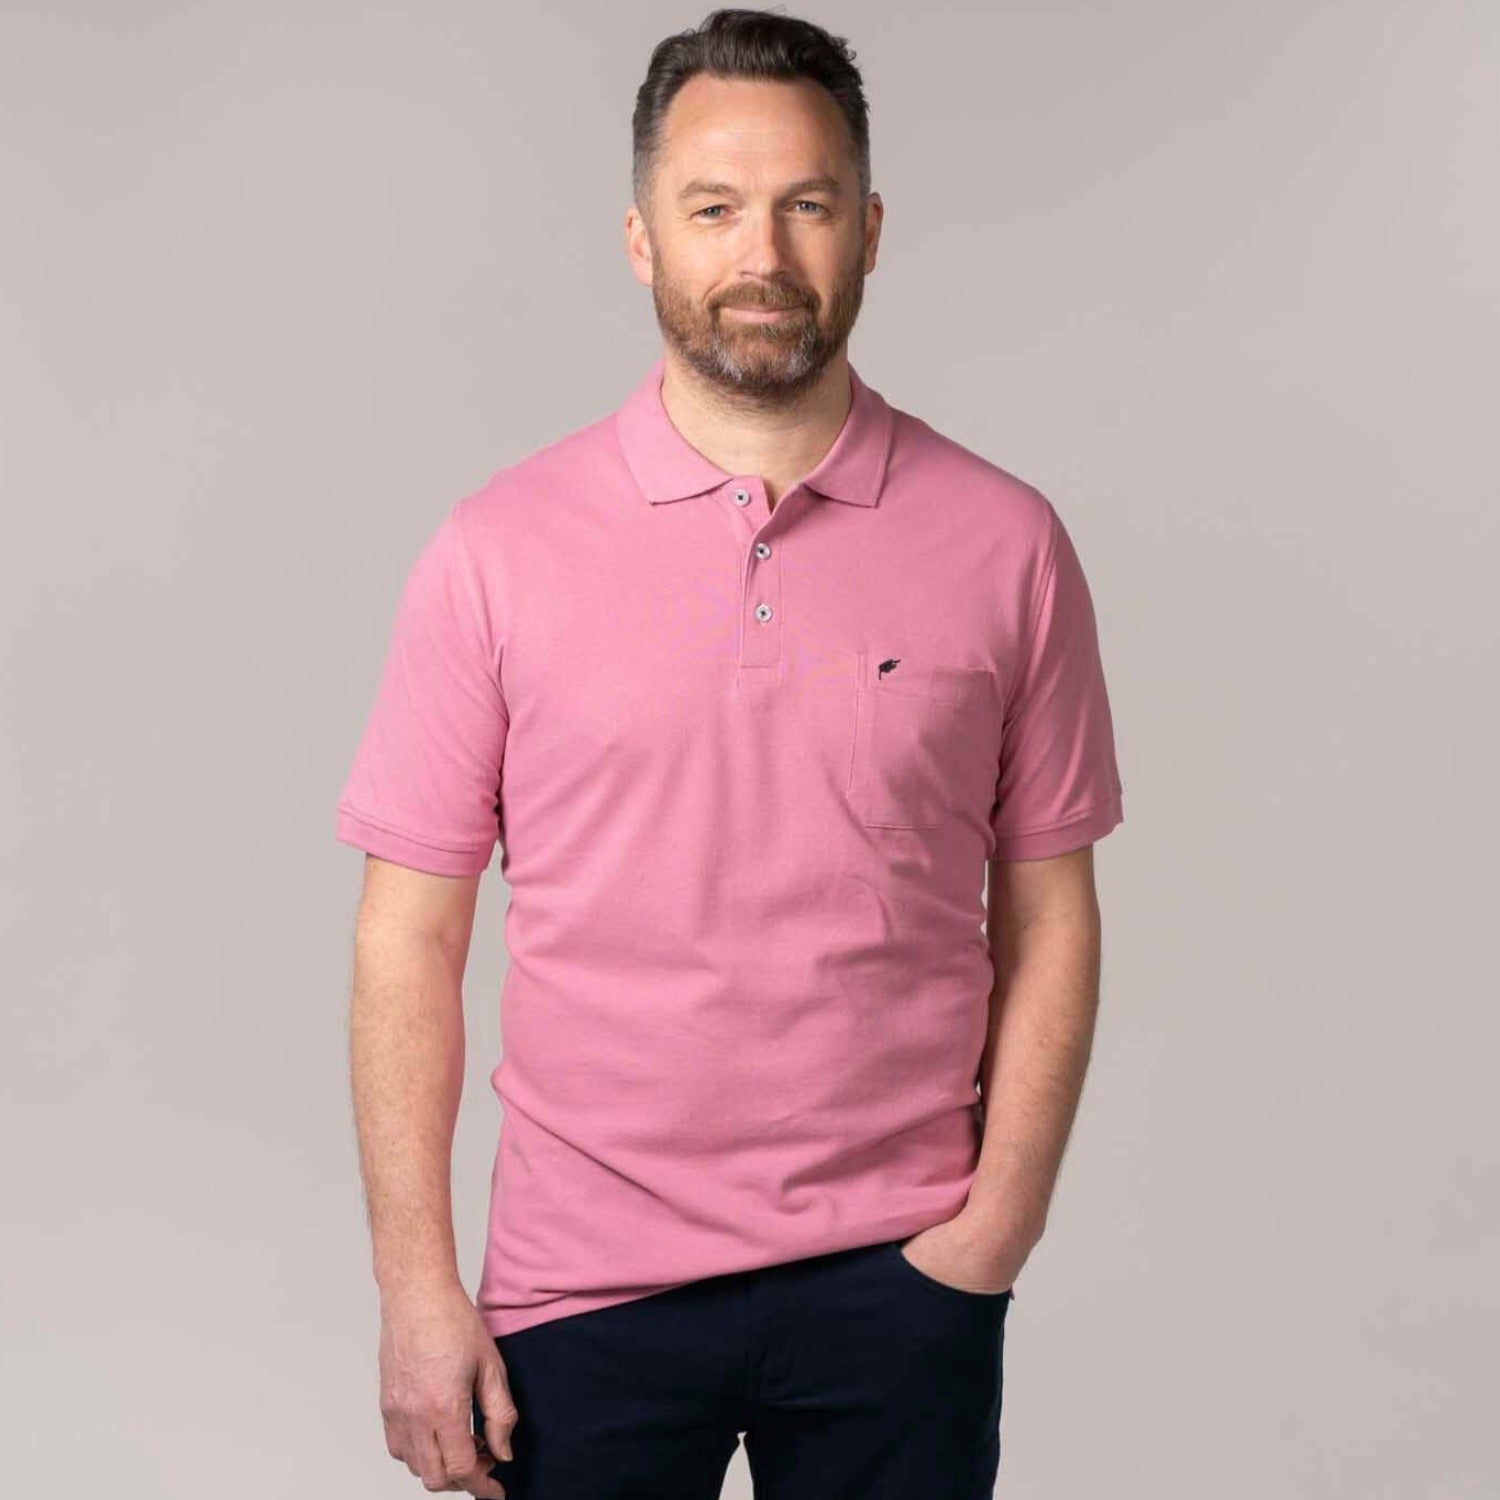 Yeats Niels Short-sleeve Polo - Dusty Rose 1 Shaws Department Stores